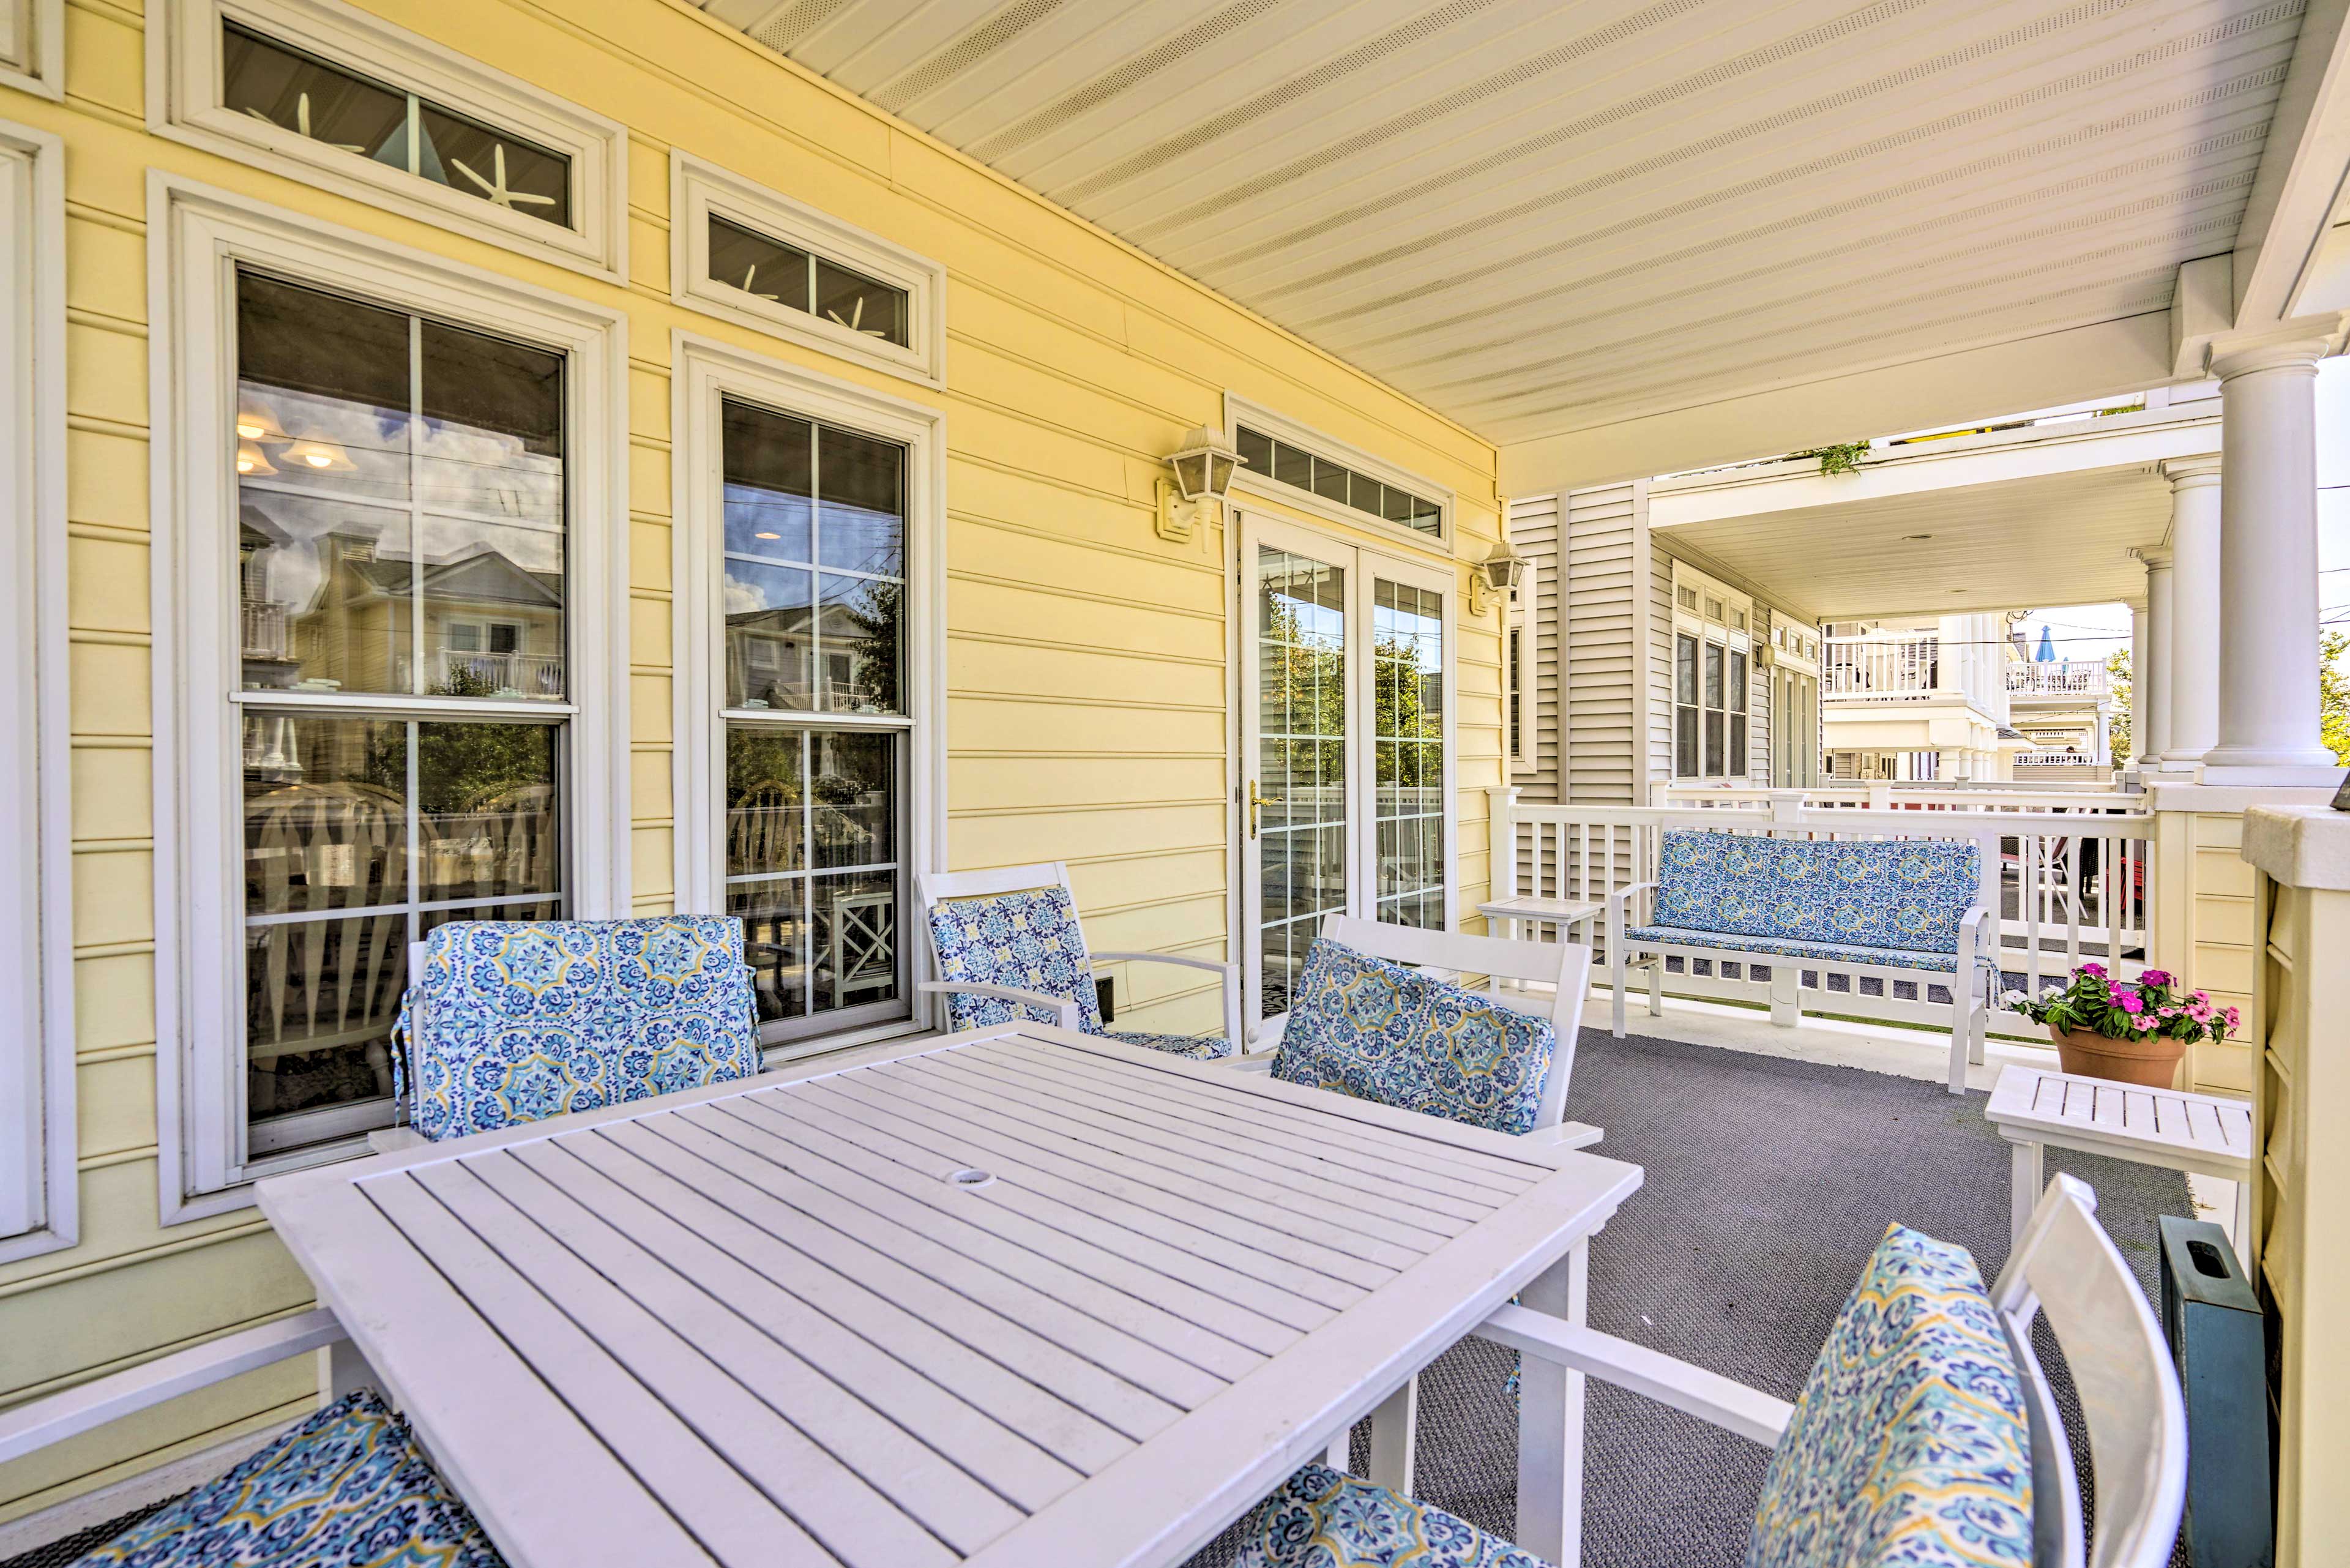 Balcony | Outdoor Dining Area | Additional Accommodations Available